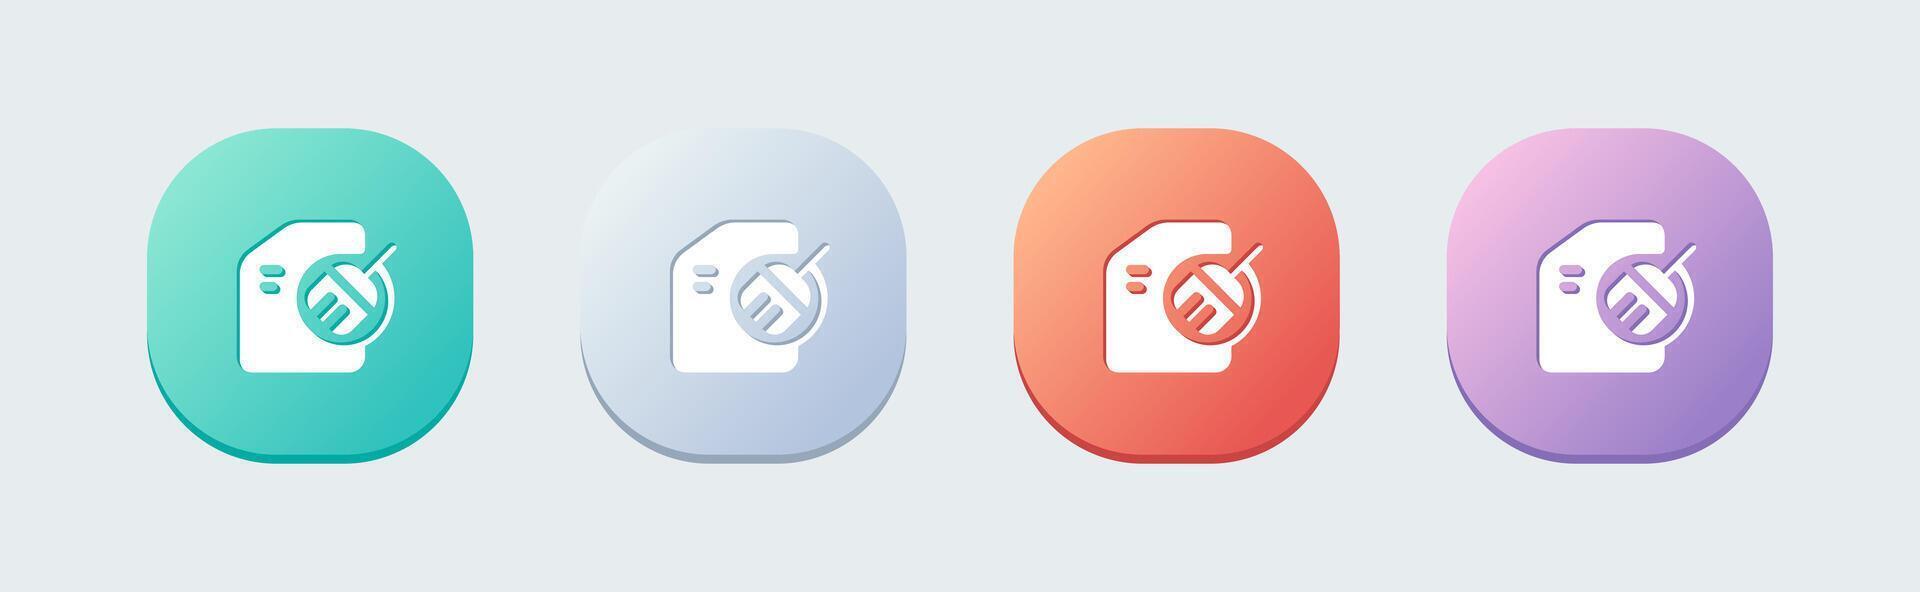 Clean disk solid icon in flat design style. Cleaner signs vector illustration.